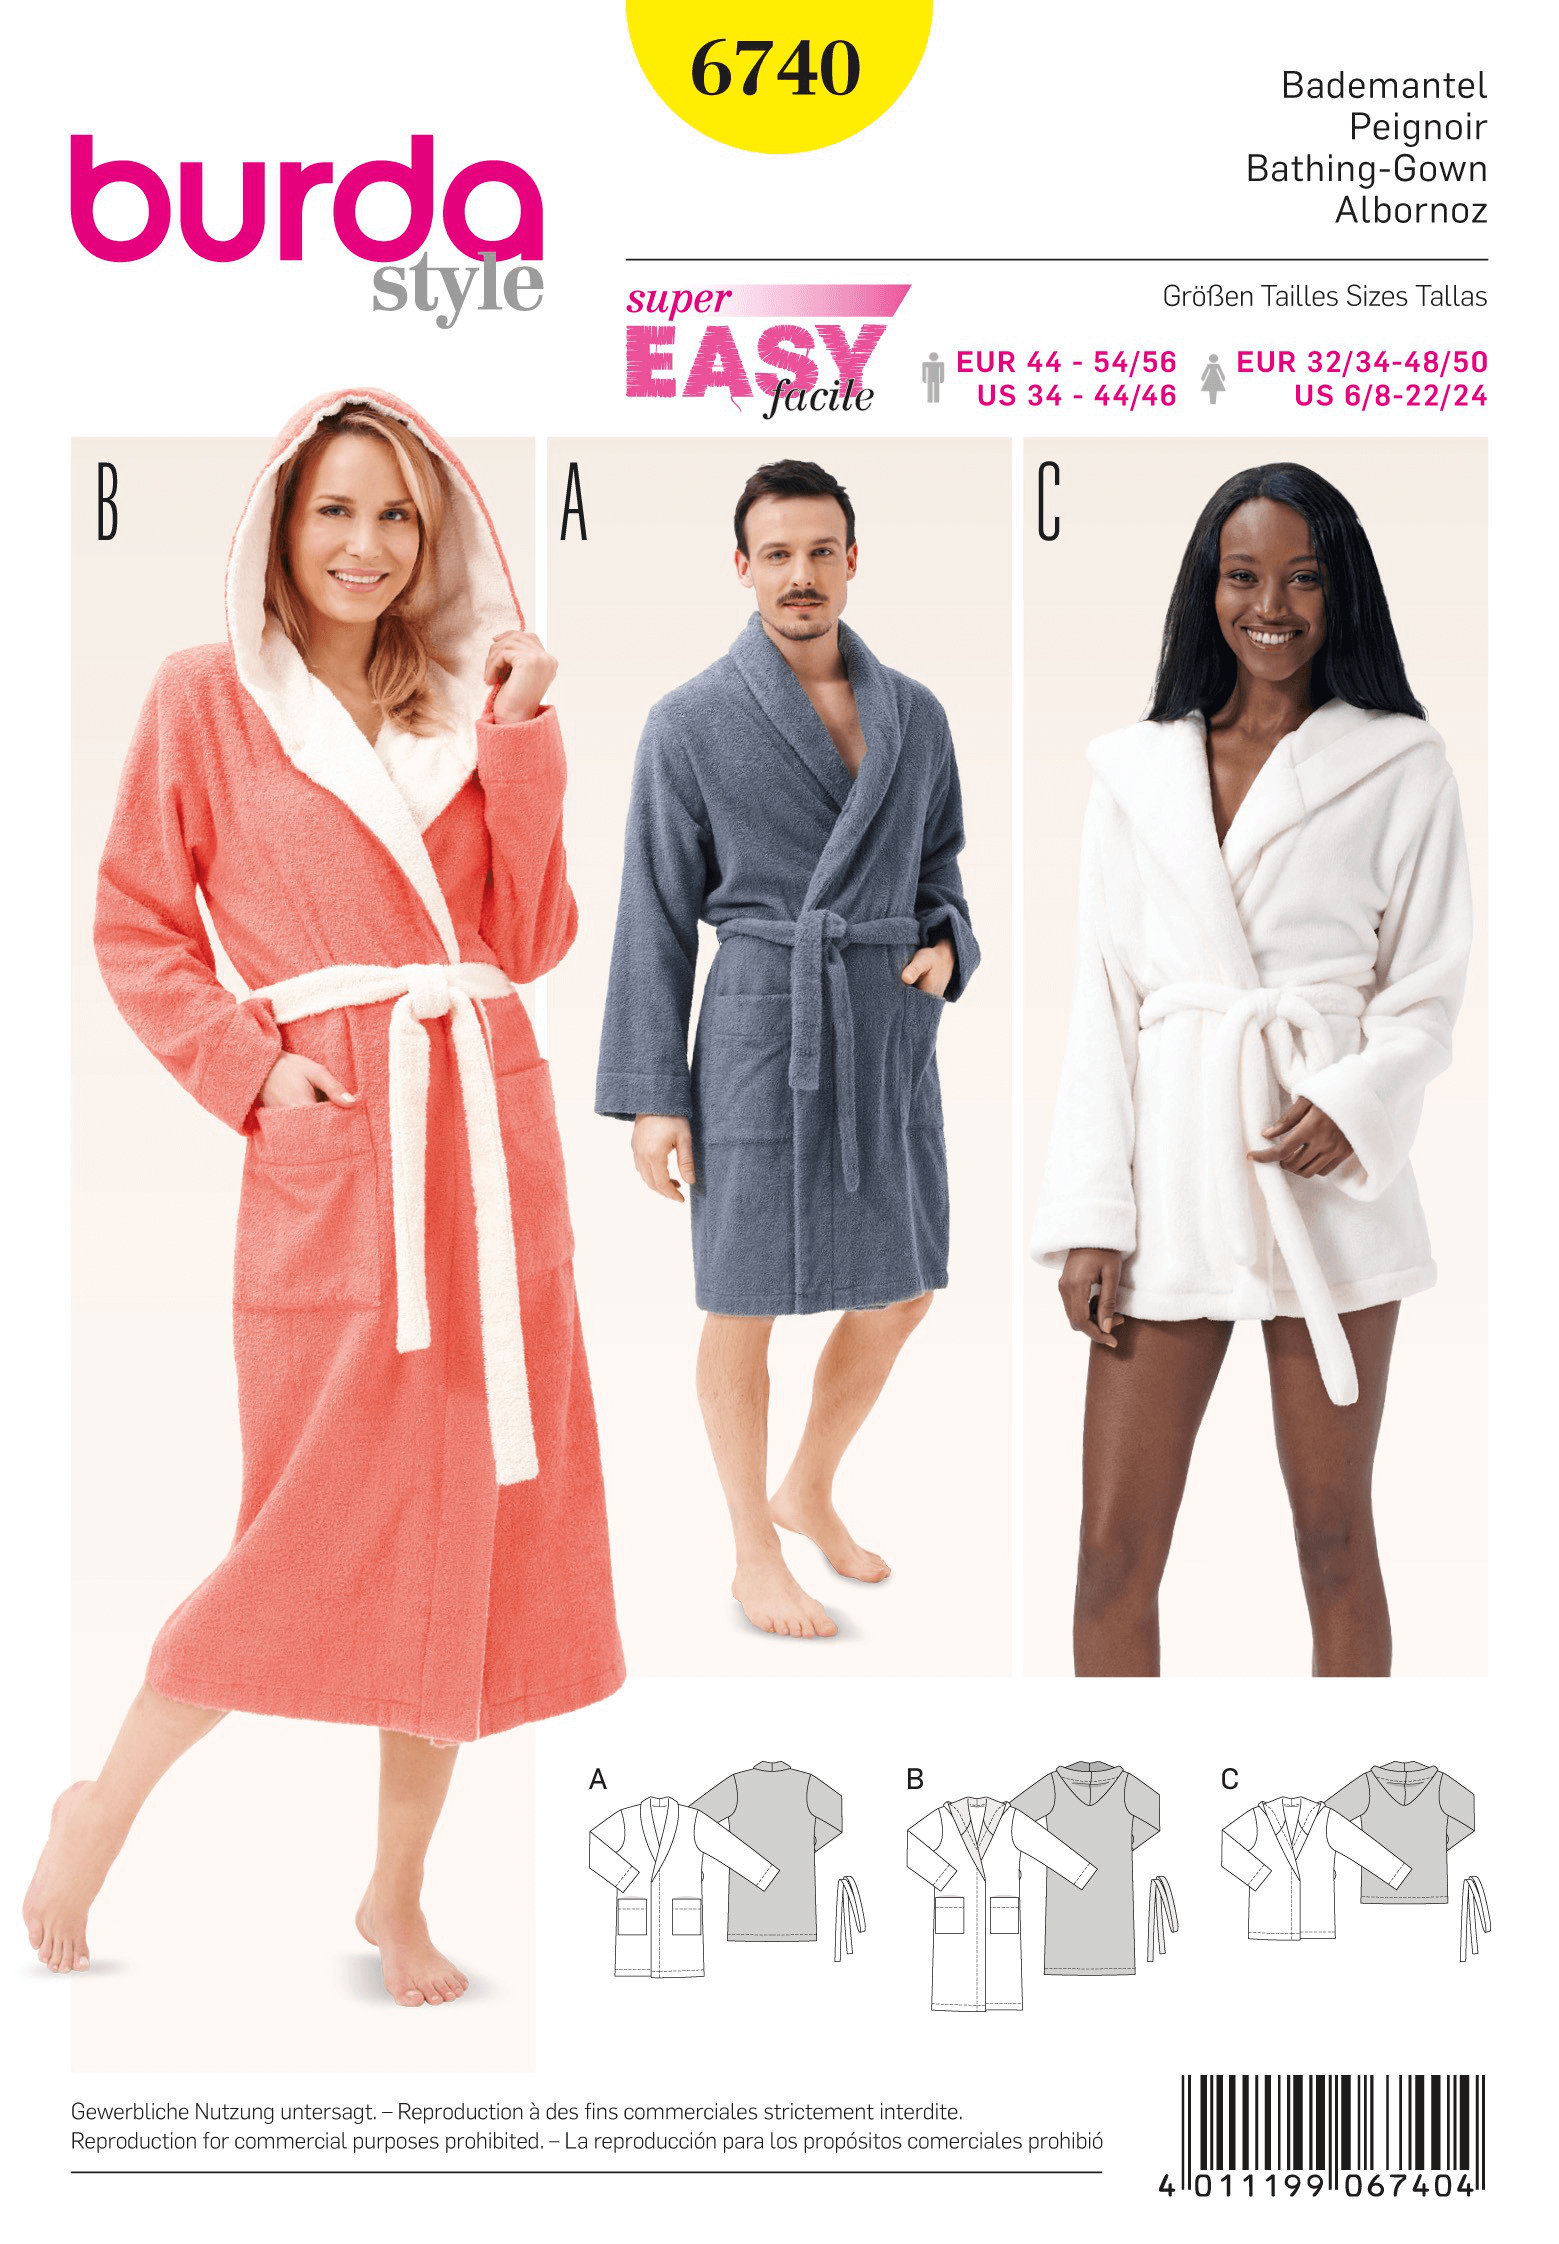 Burda Style His and Hers Bathrobes Unisex Fabric Sewing Pattern 6740